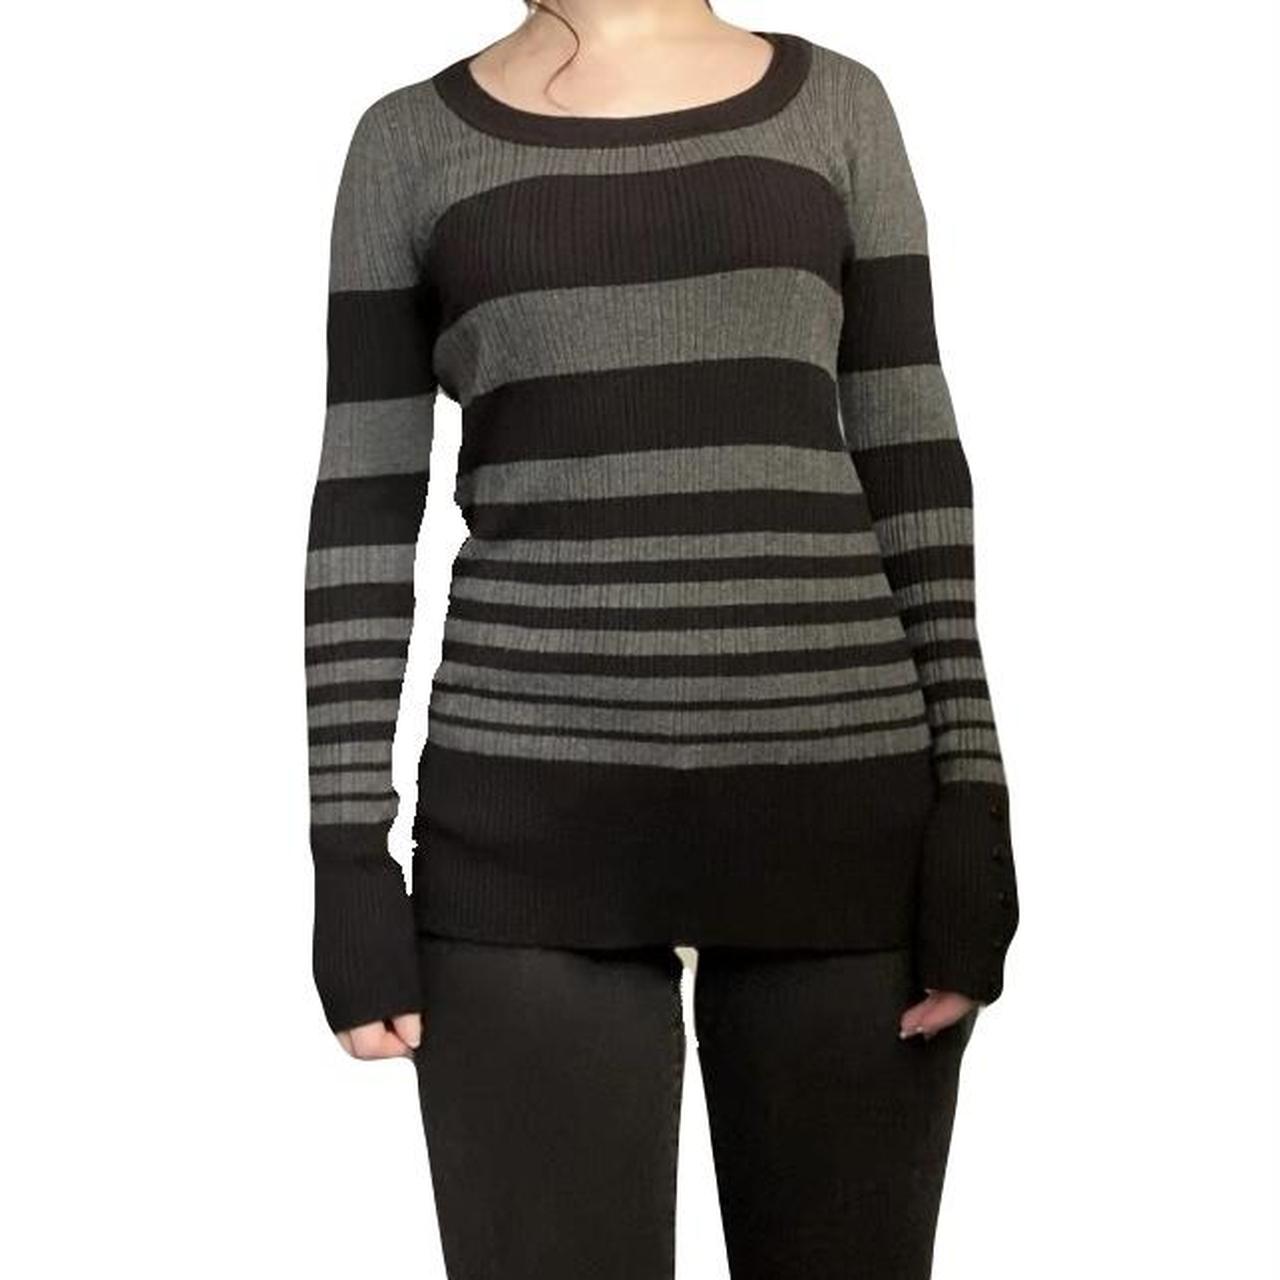 Hooked Up by IOT Women's Black and Grey Jumper (3)